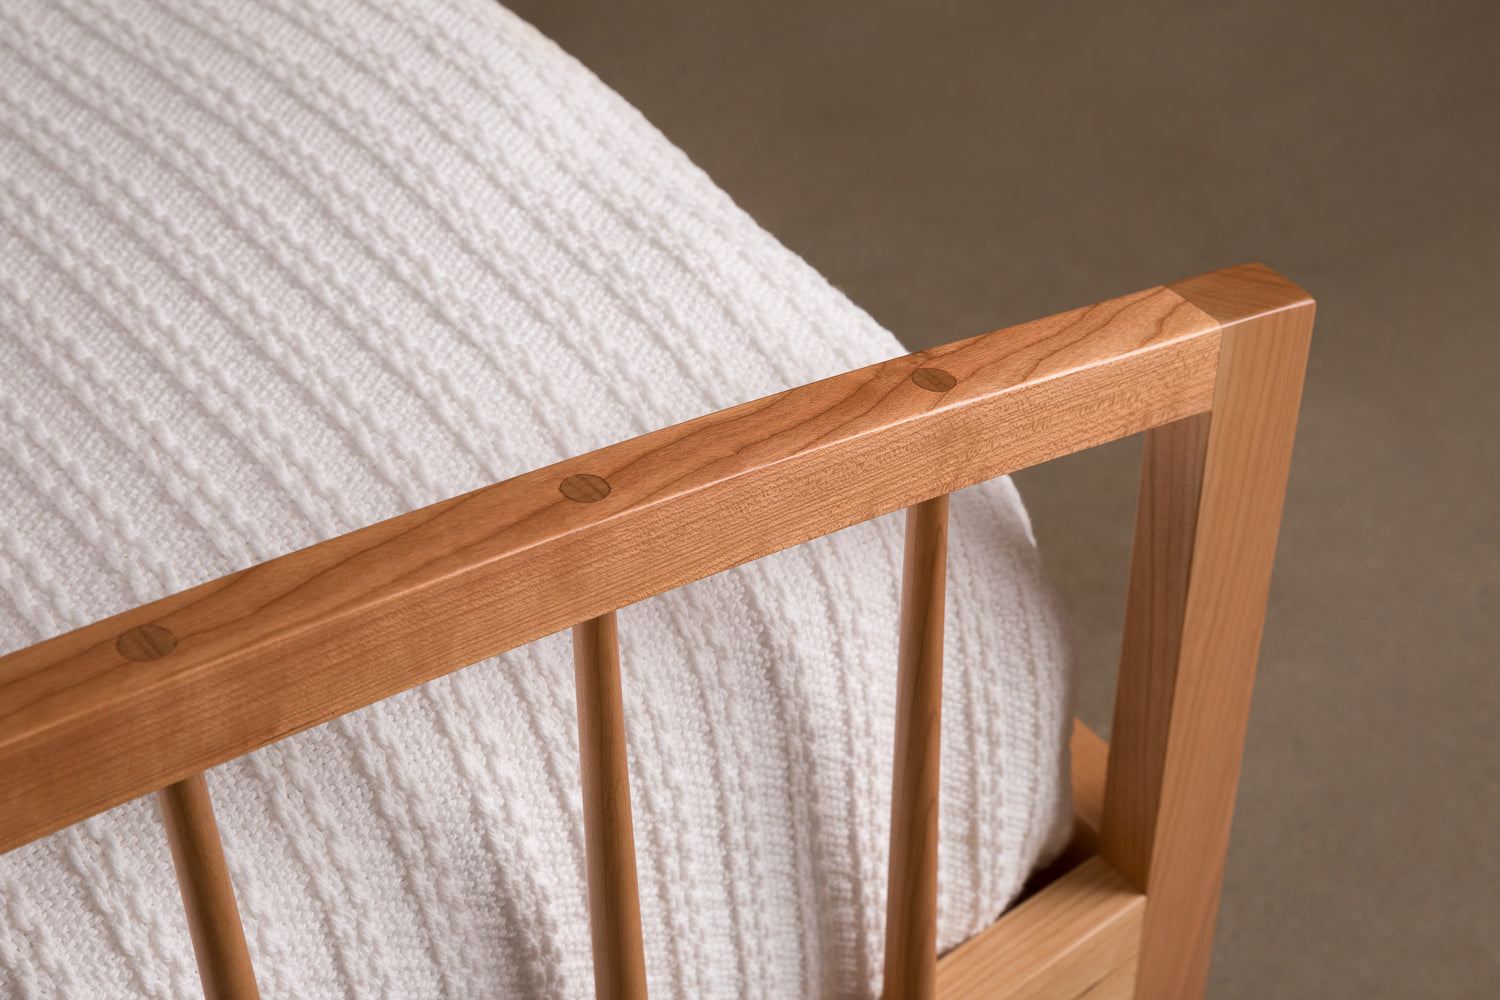 Mortise and tenon joinery on  arched footboard of Burnette Spindle Bed